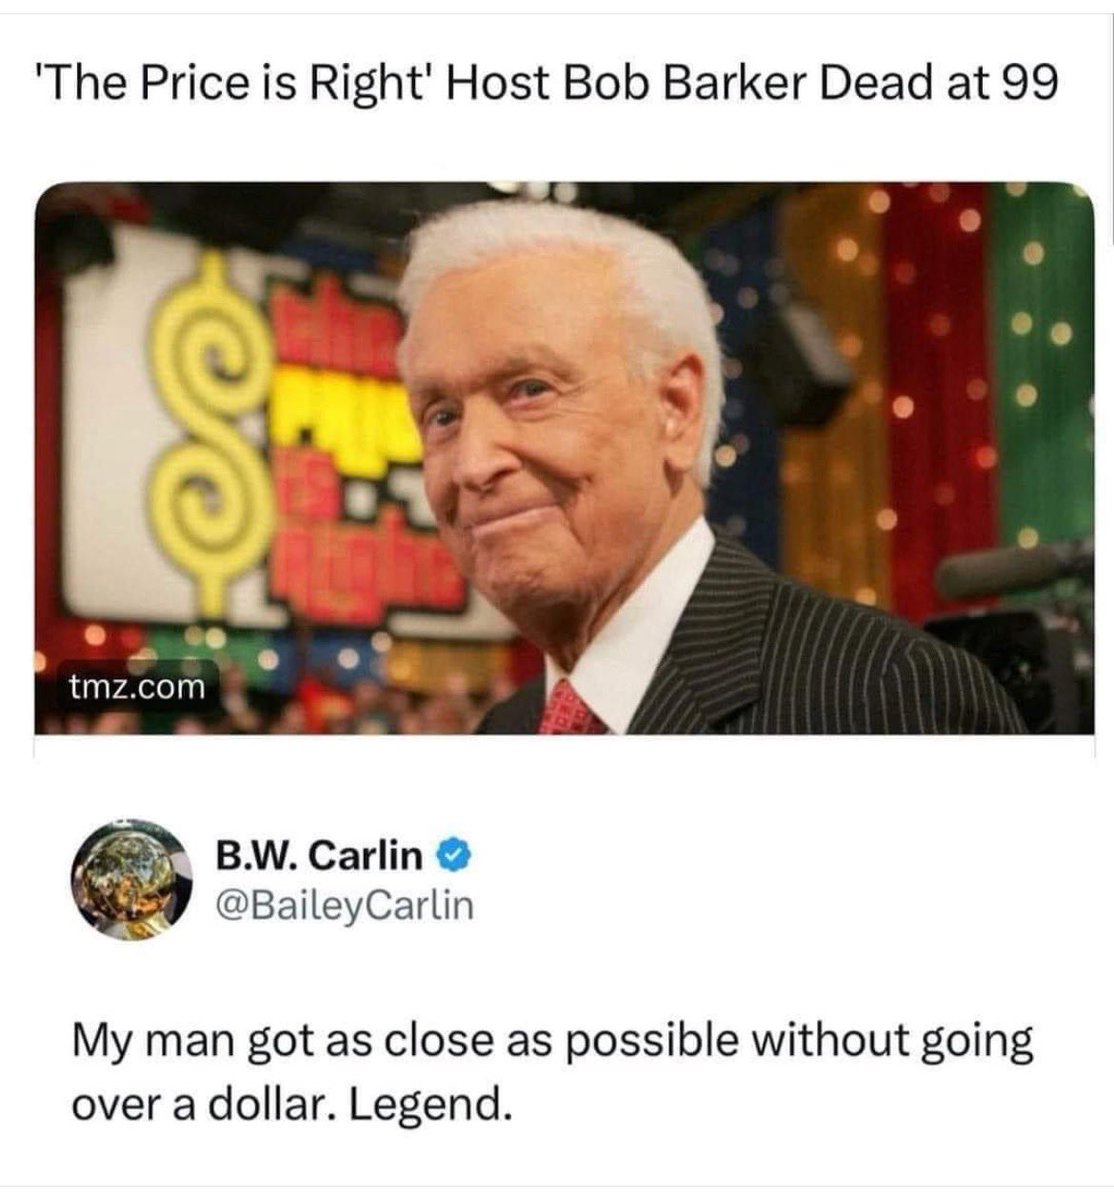 THIS is the winning comment on Bob Barker’s passing! #RIPBobBarker